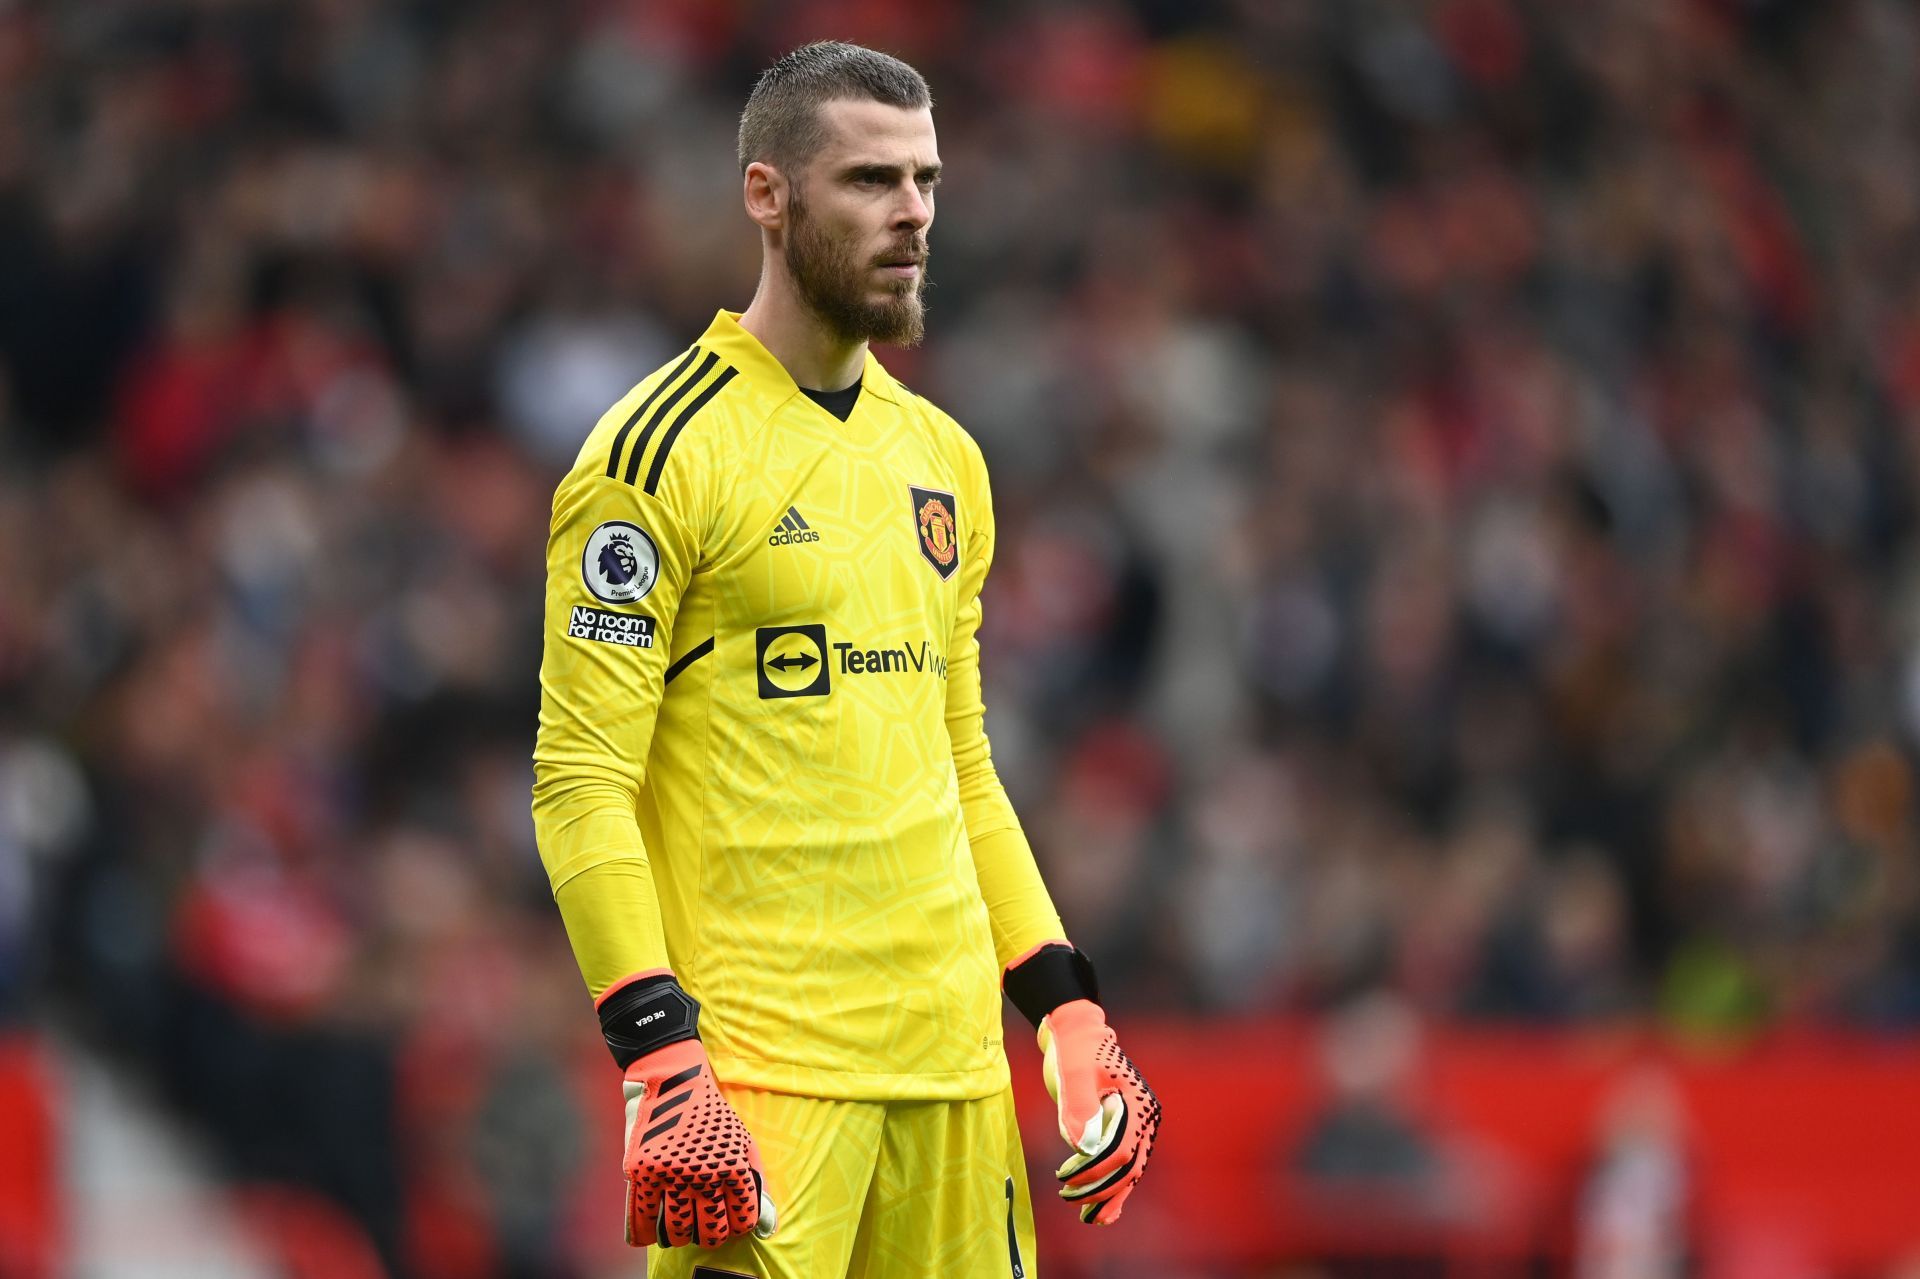 De Gea won the Golden Glove but he has obvious deficiencies that need to be addressed